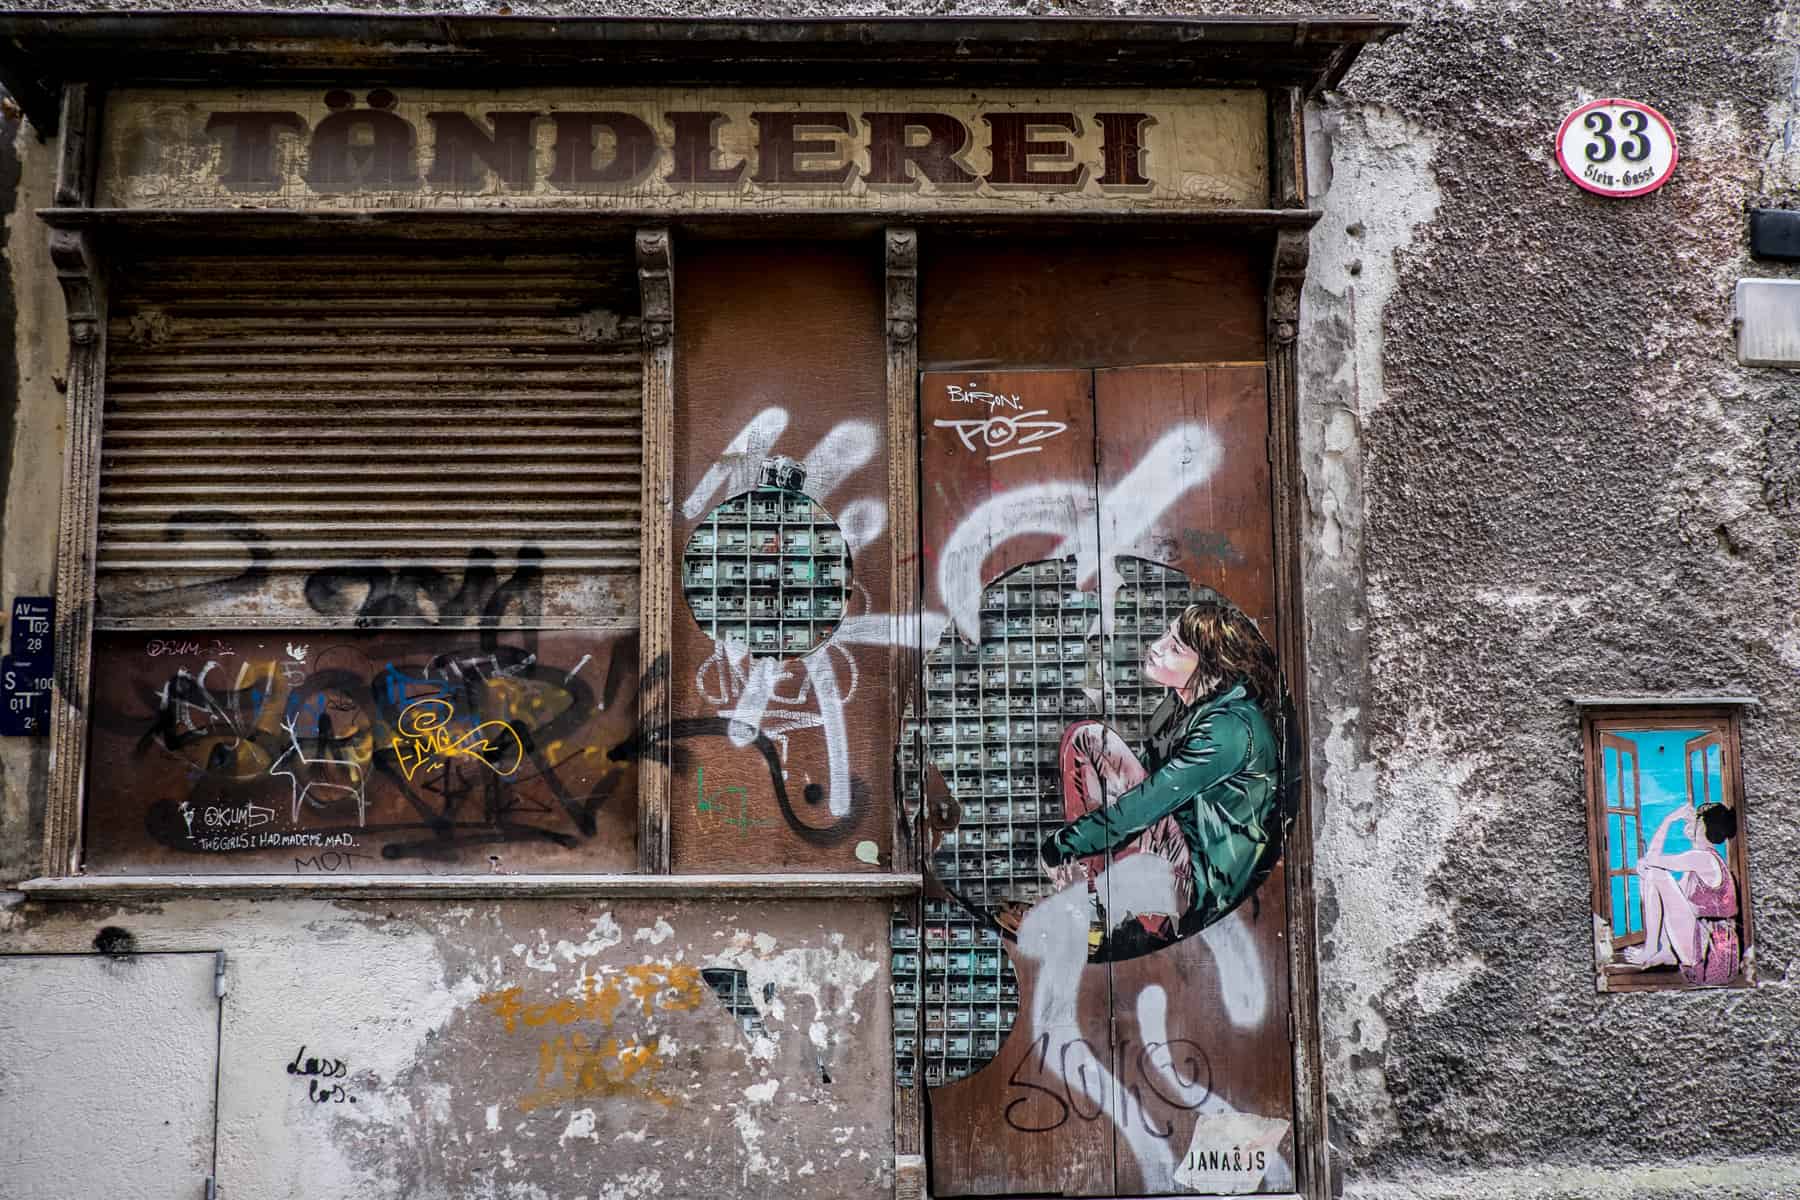 An old shop front with brown shutters, a brown door and a yellow and brown shop sign that reads "Tändlerei" is covered in modern street art paintings of women sitting in doorways and windows. 